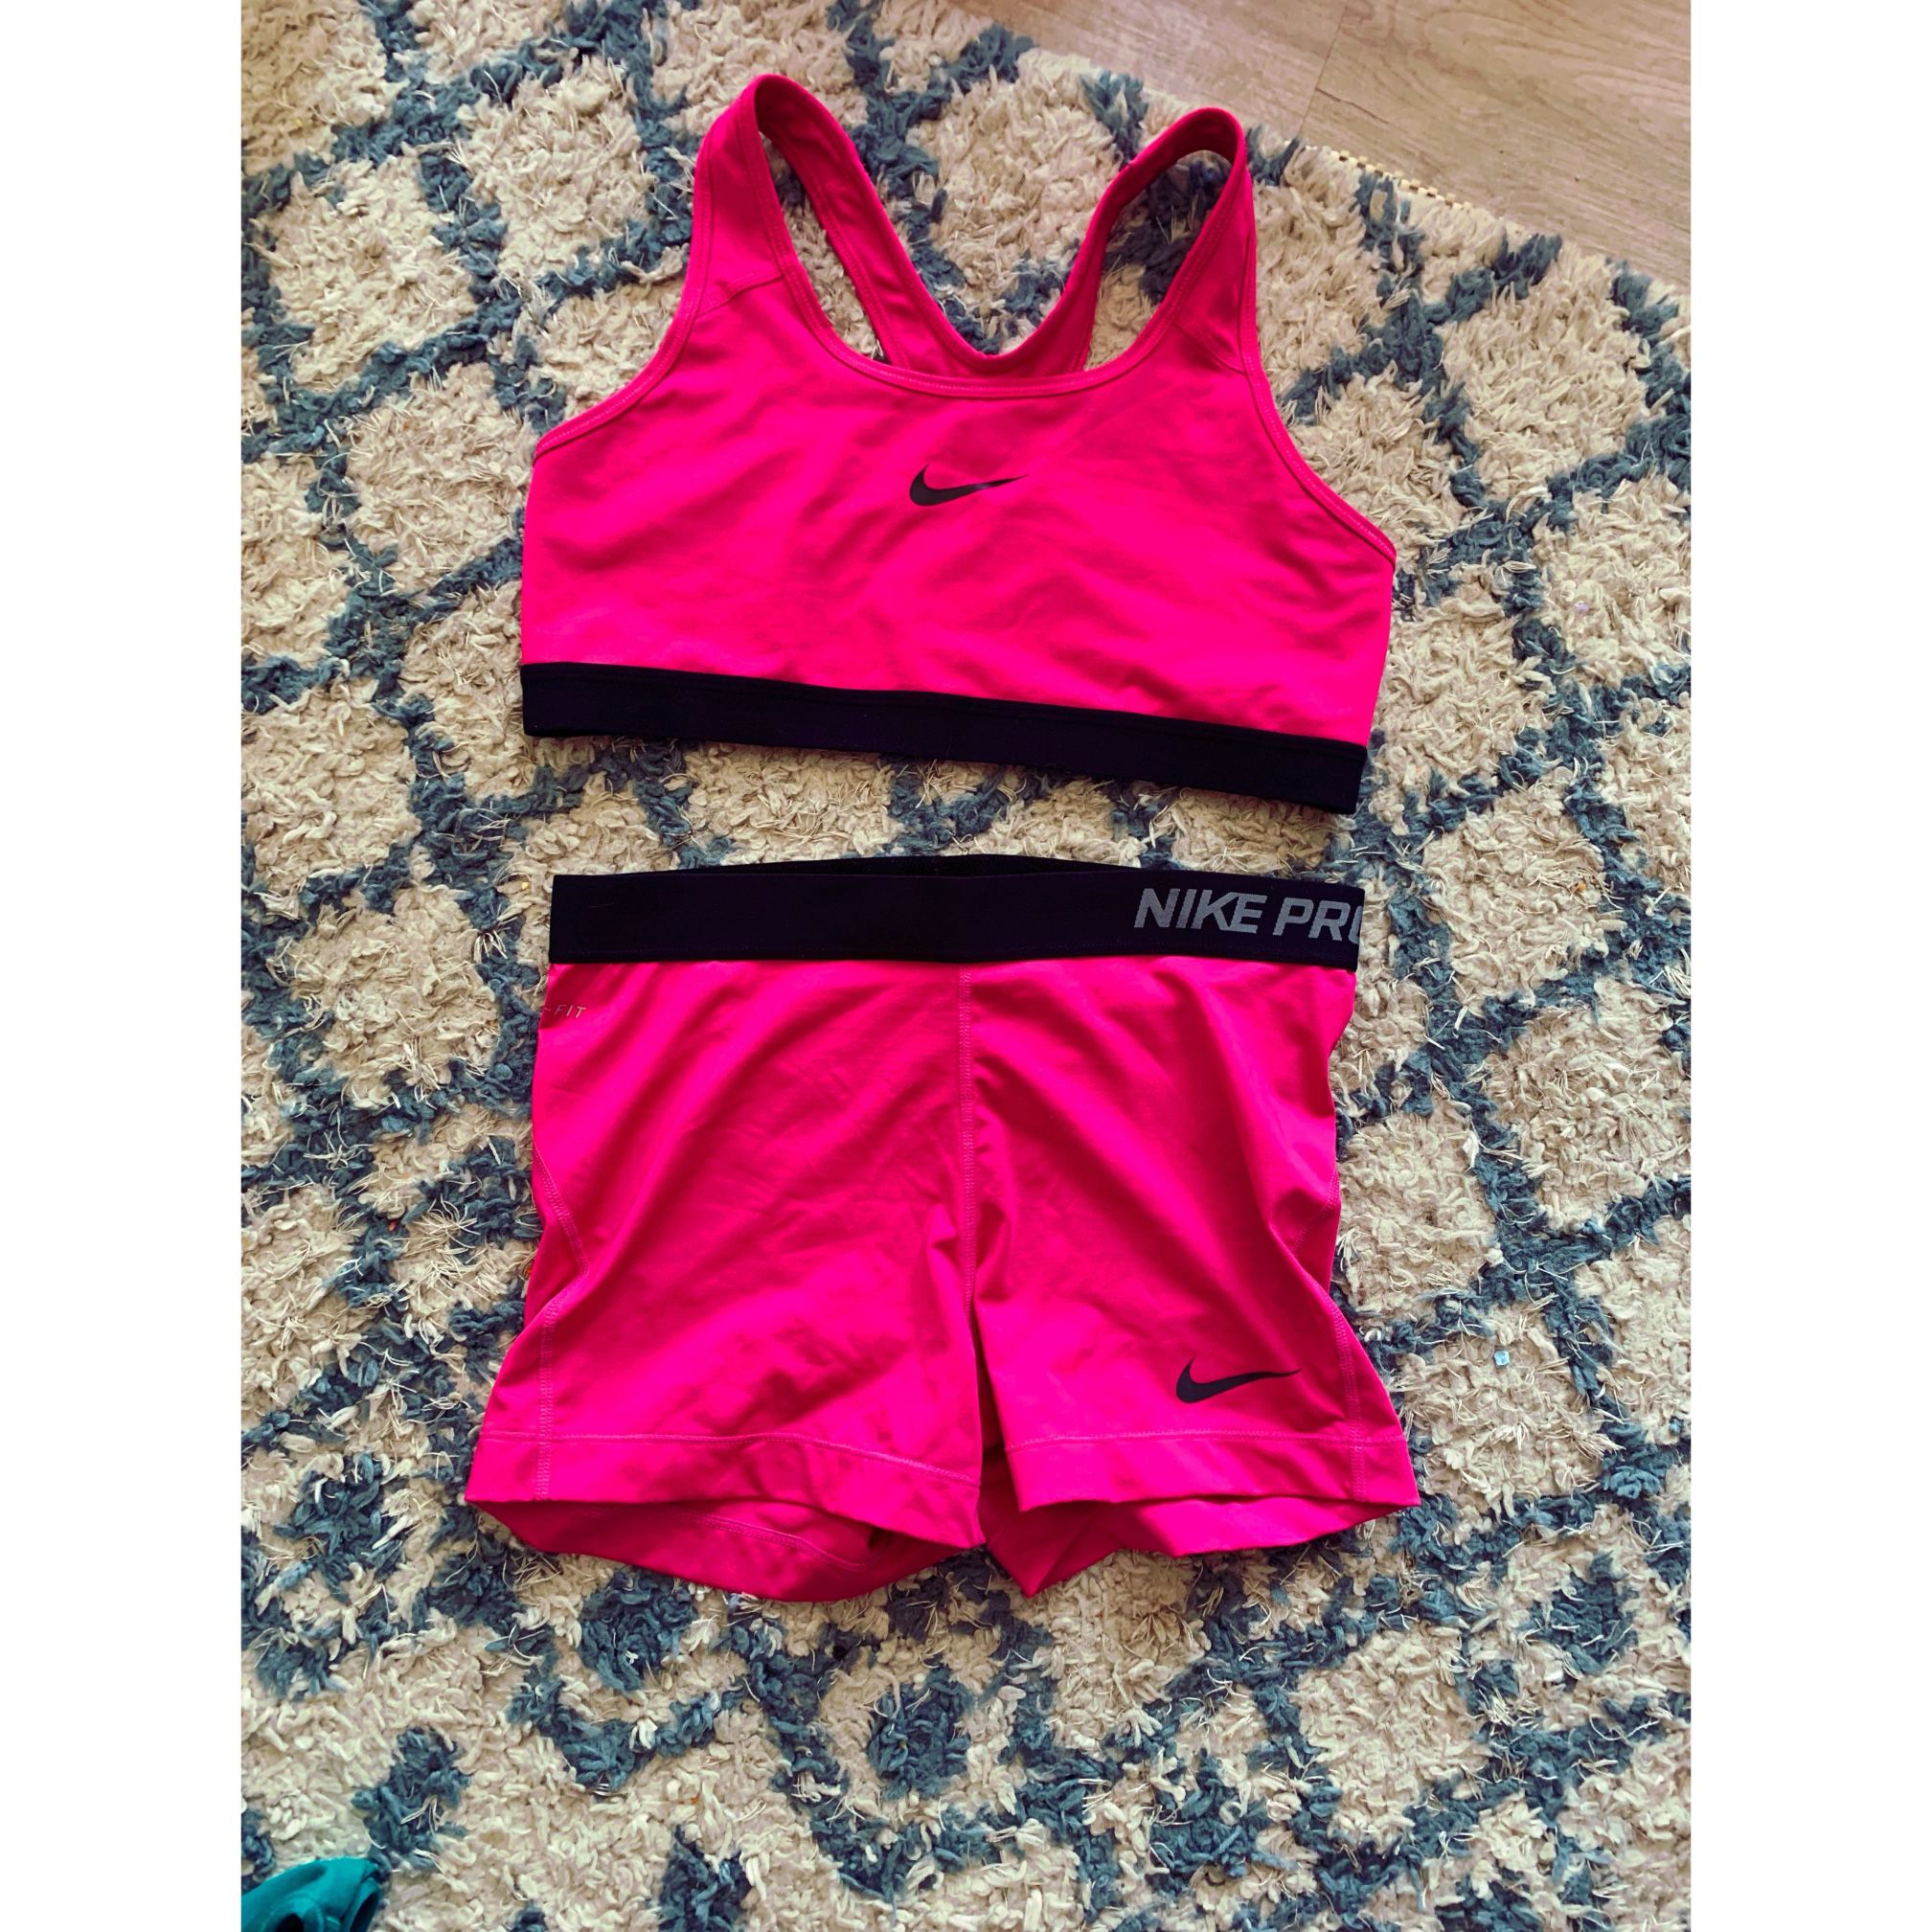 Nike Pro Bra And Shorts Set for Sale in Fairport, NY - OfferUp